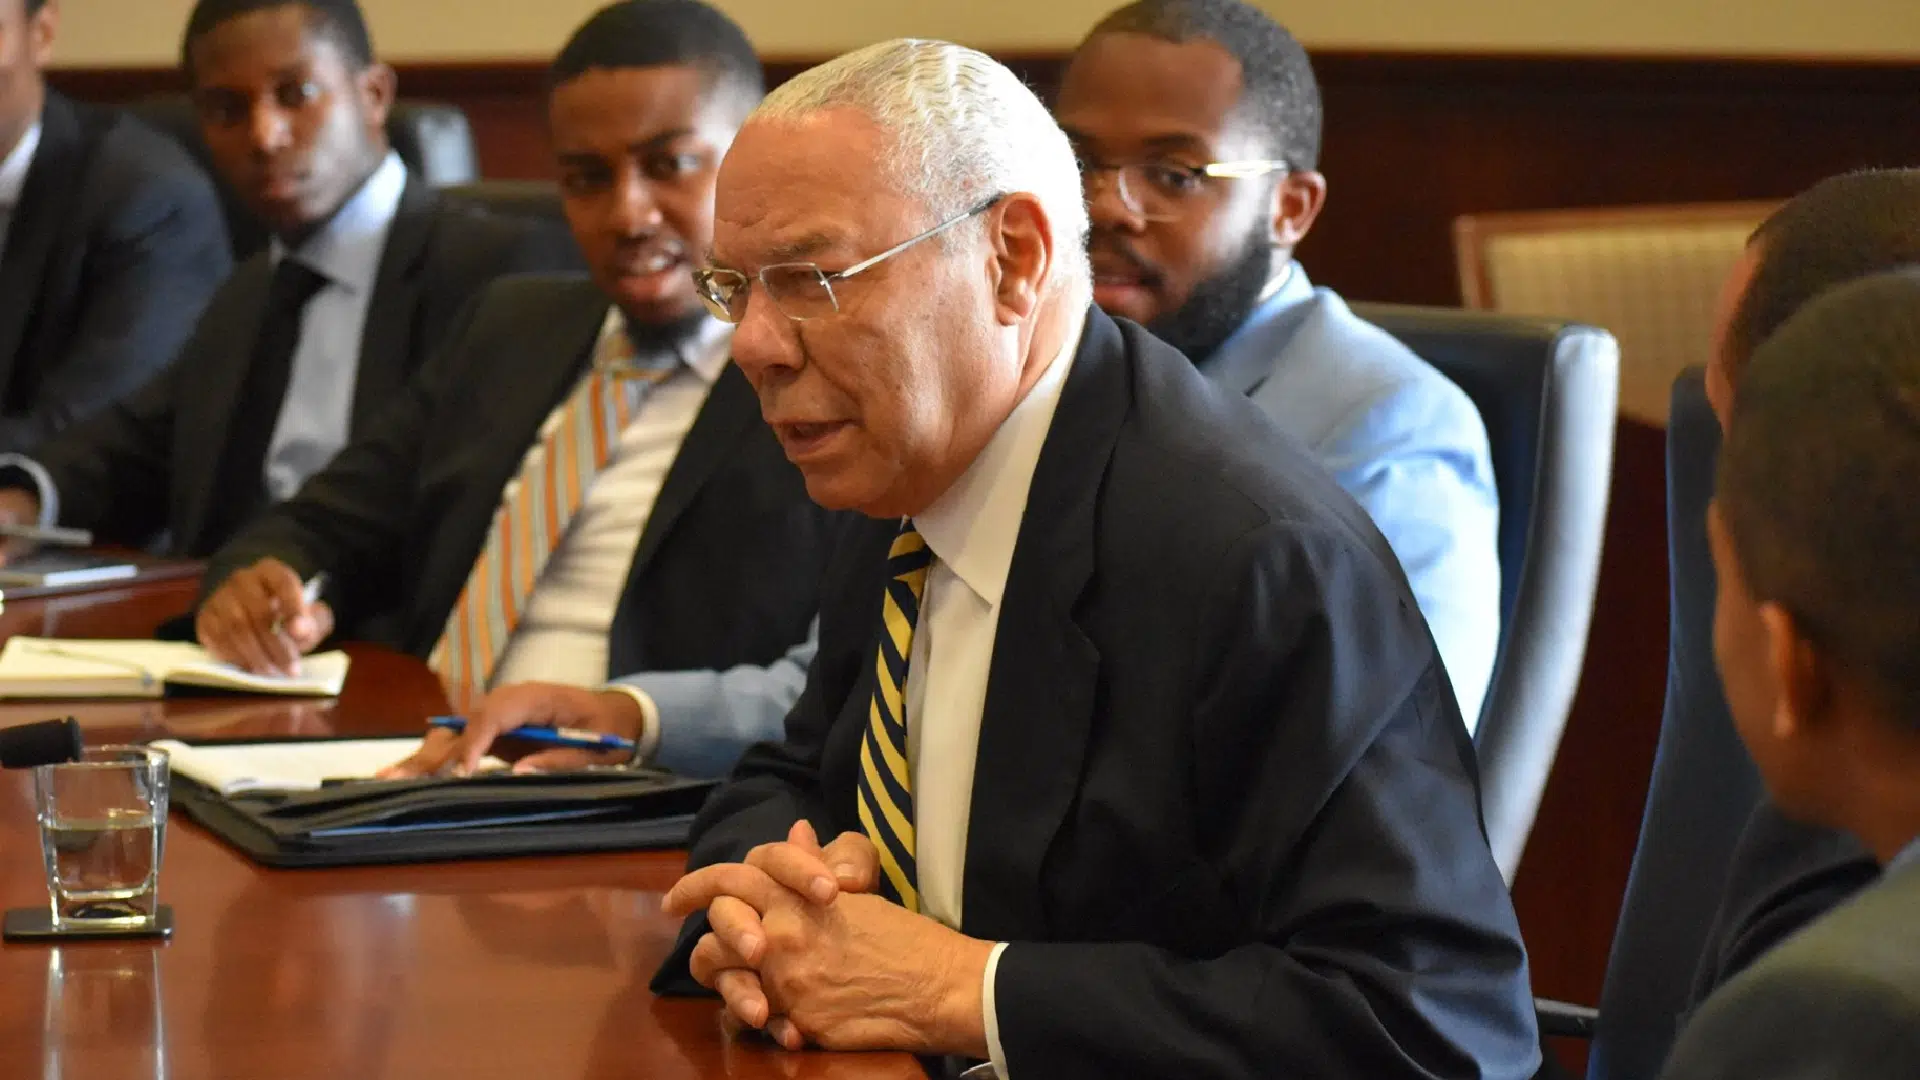 Colin Powell Dies At Age 84